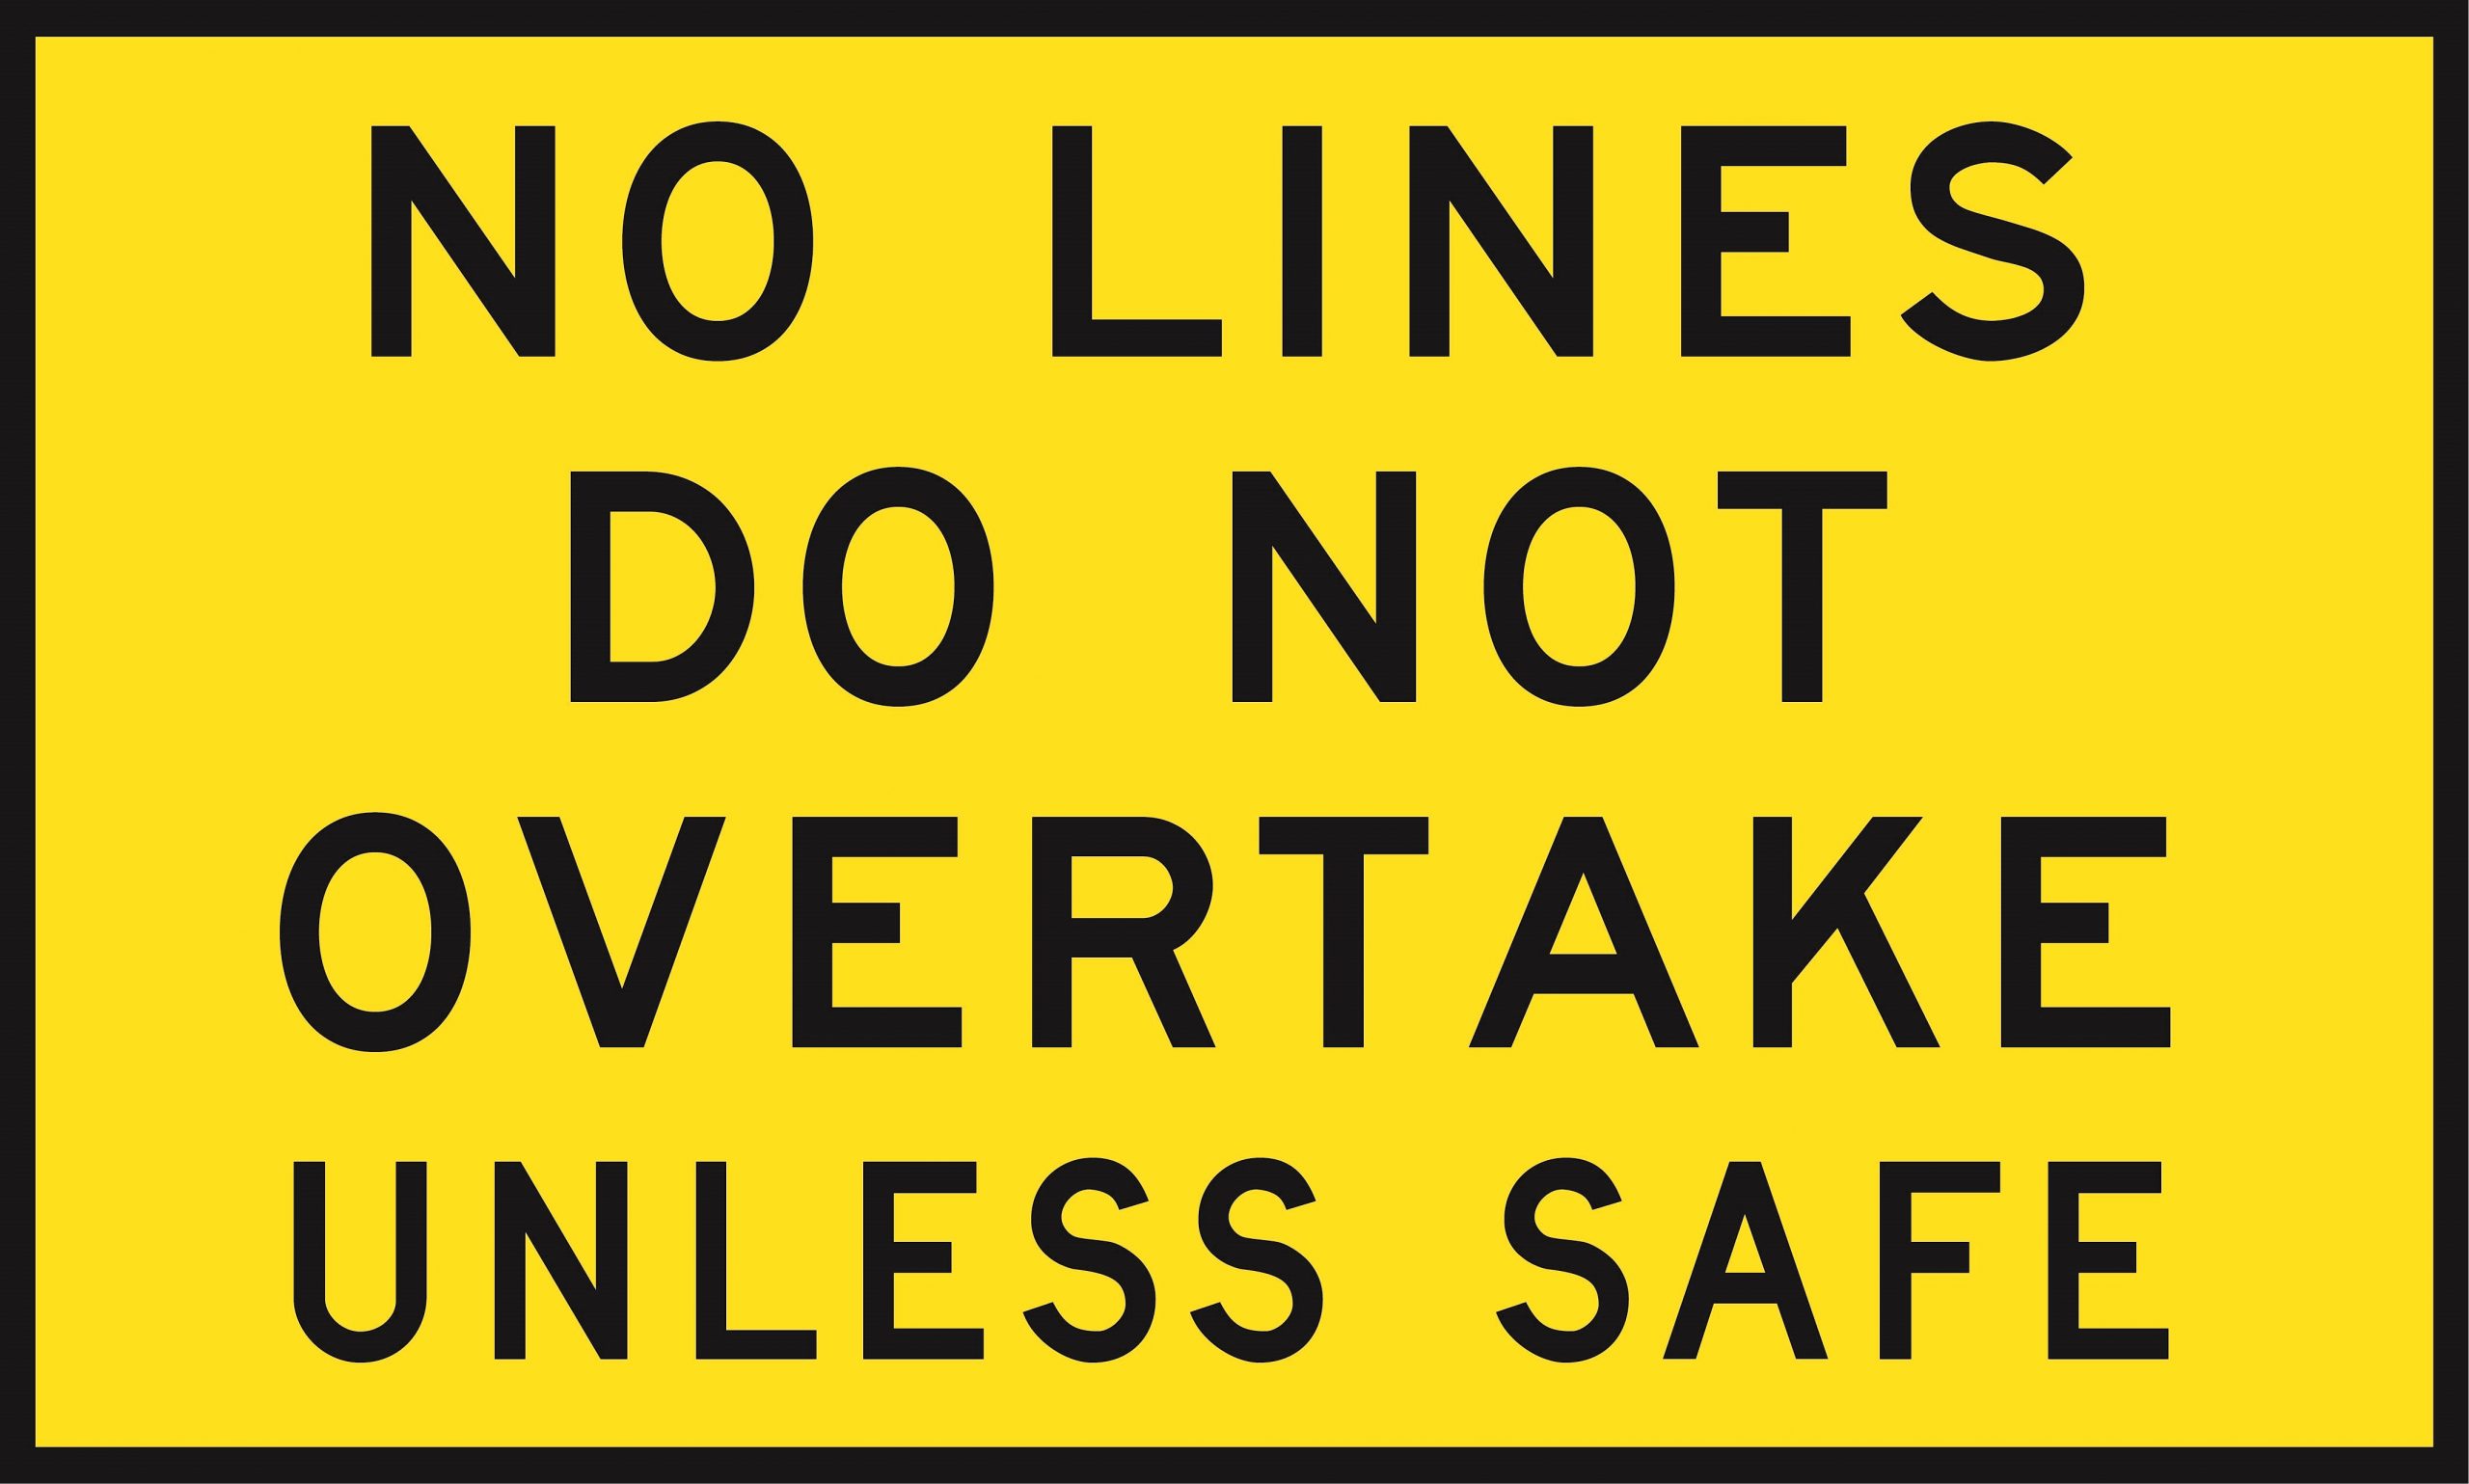 No Lines Do Not Overtake Unless Safe (Cl1) 1500 x 900 BEP